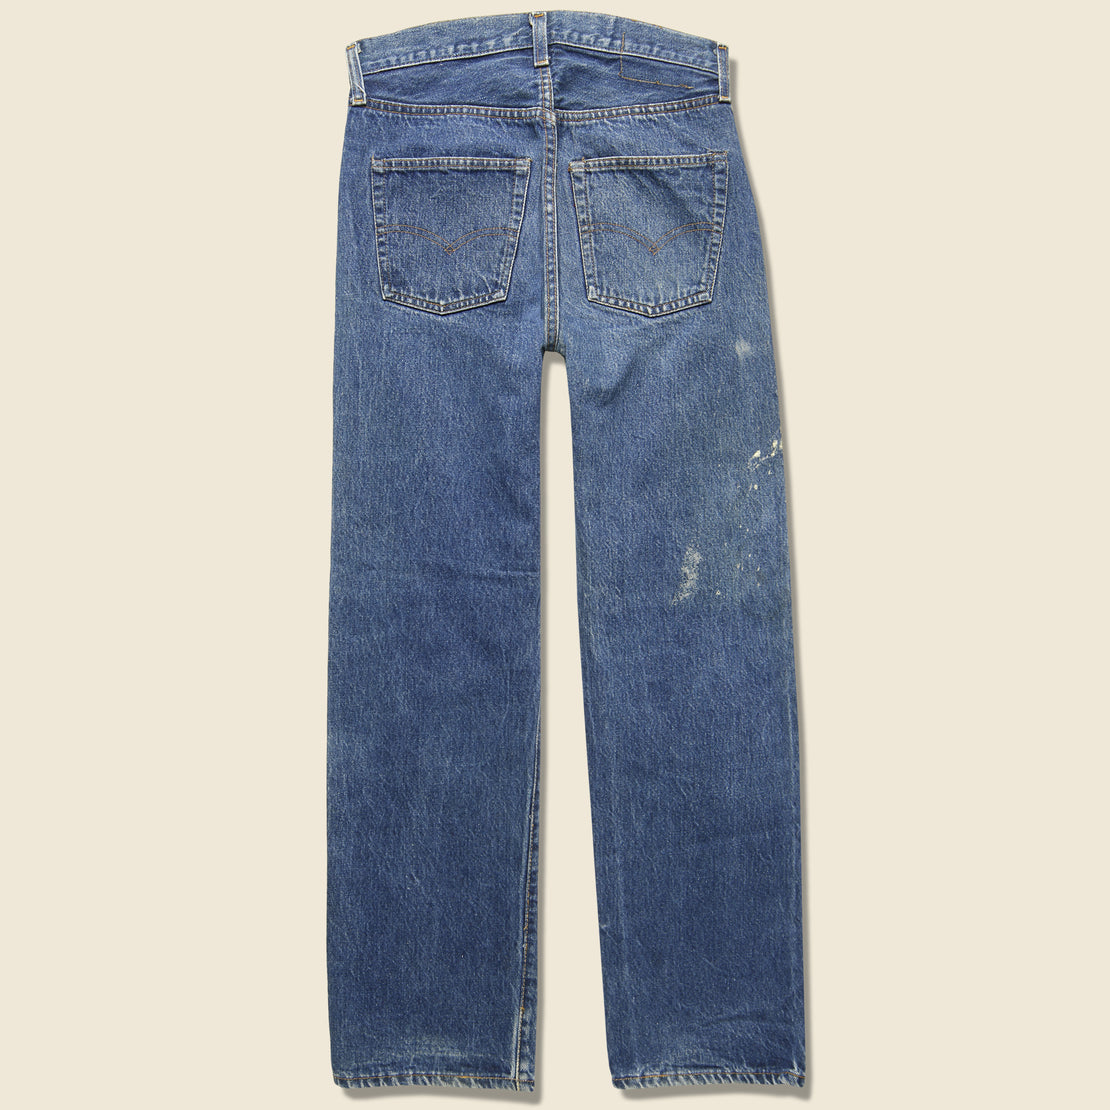 Cranes Levi's Selvedge 501 - Blue - Fort Lonesome - STAG Provisions - W - One & Done - Apparel